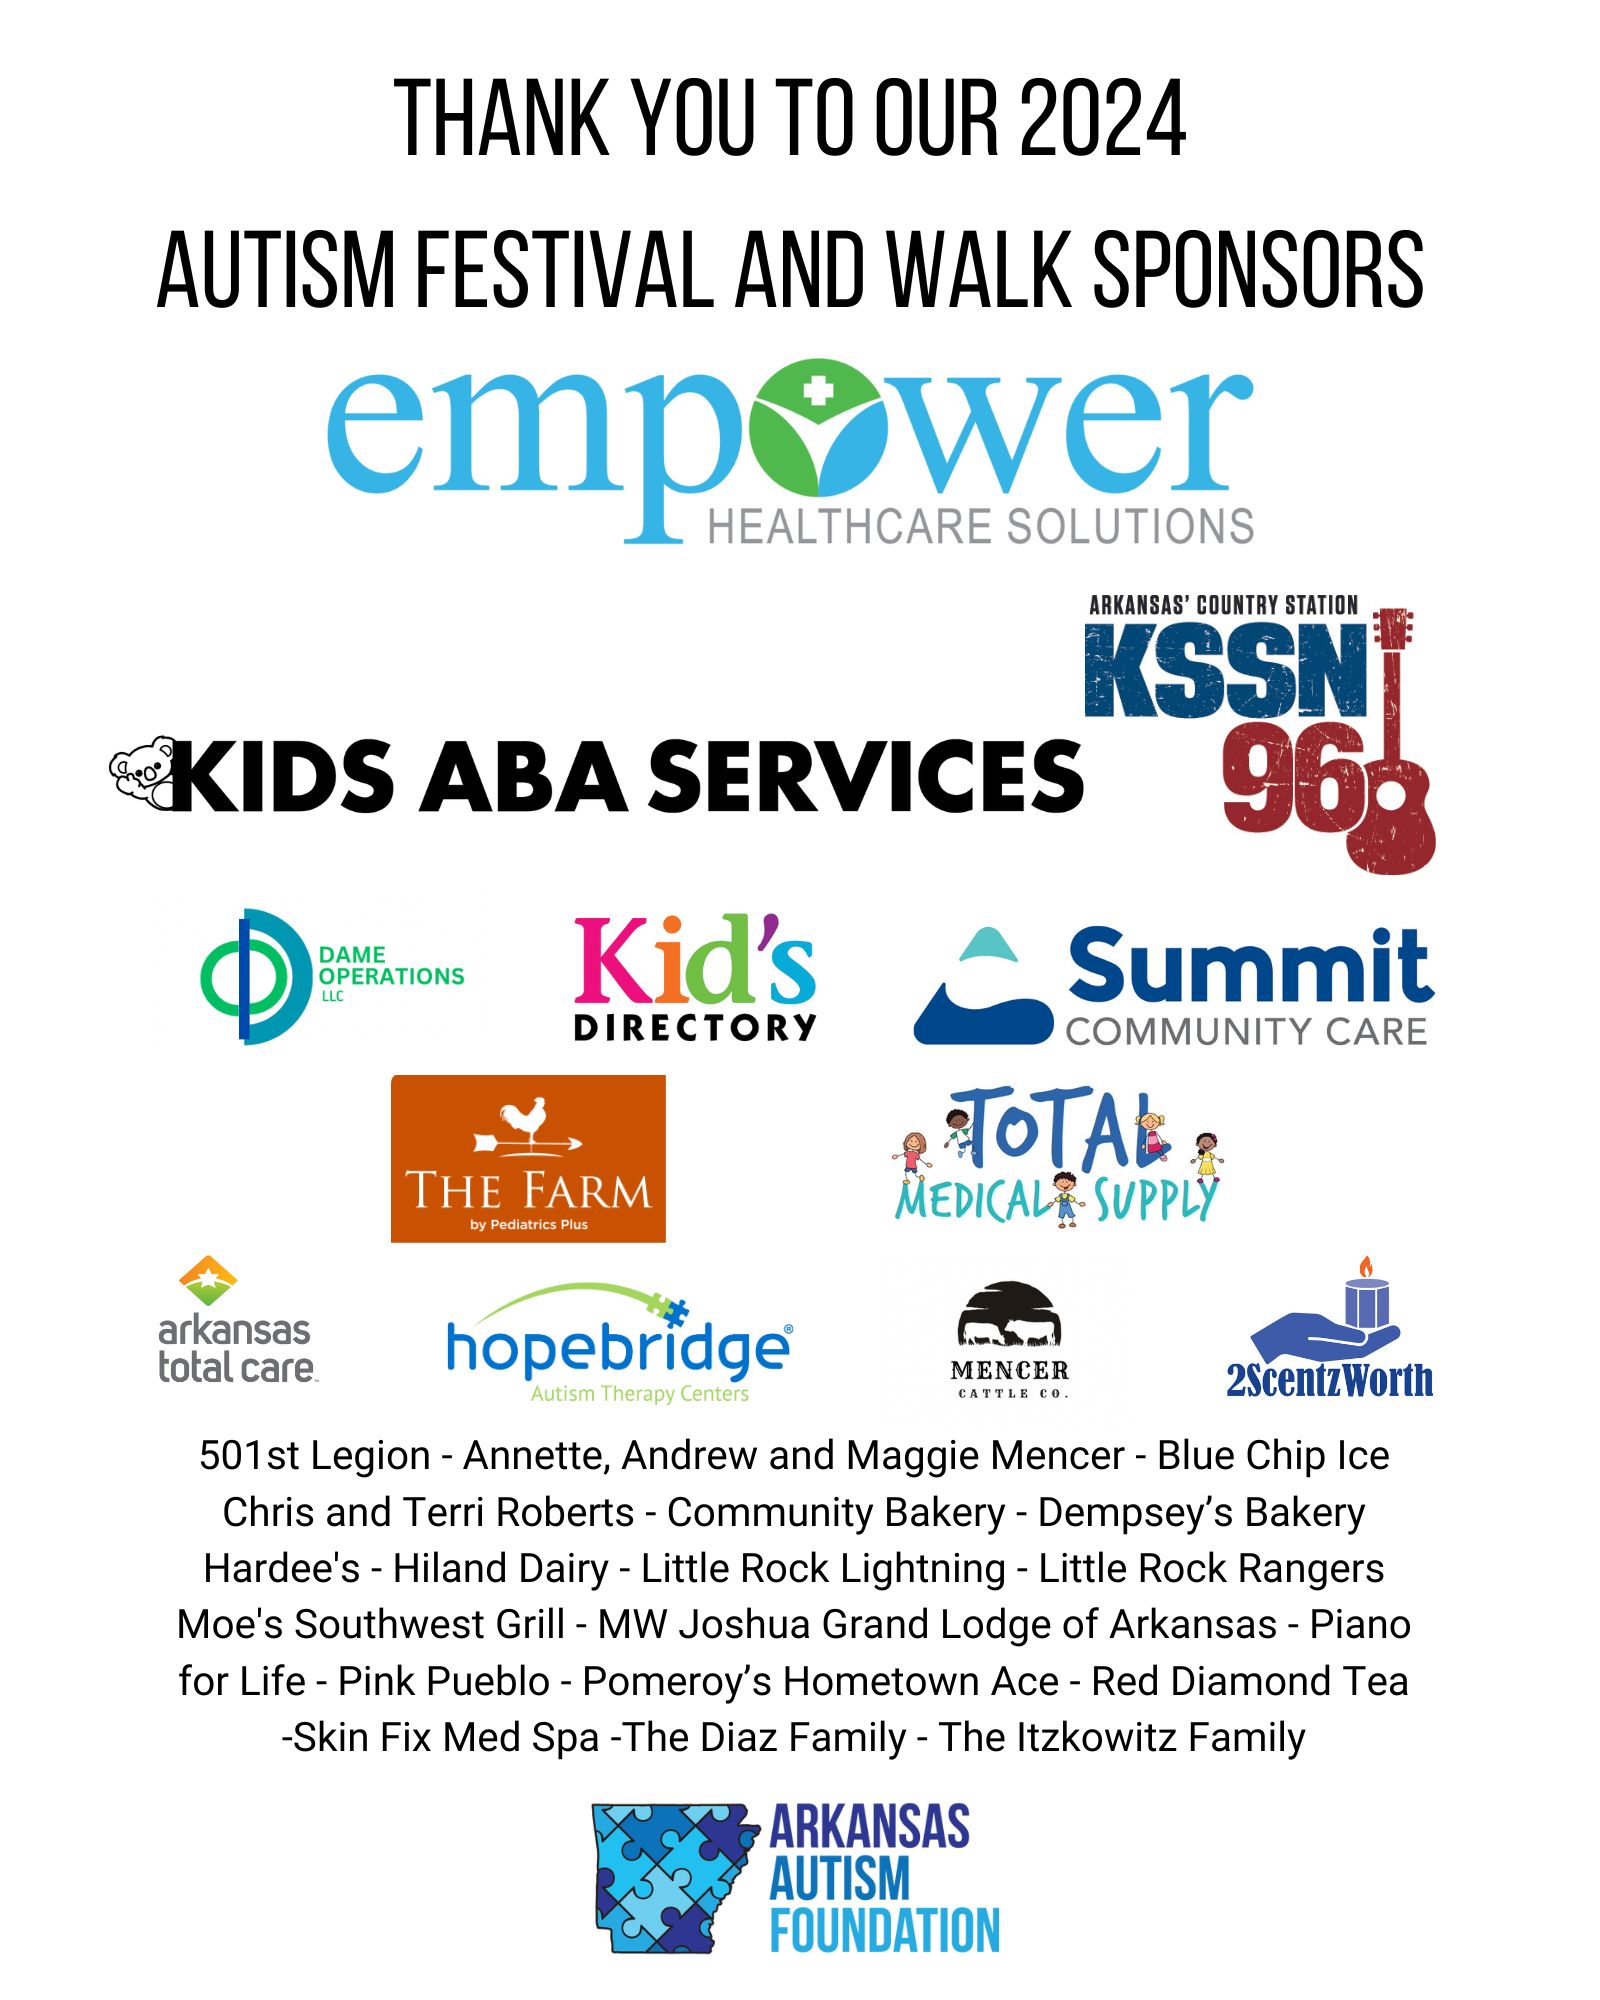 Autism Festival and Walk